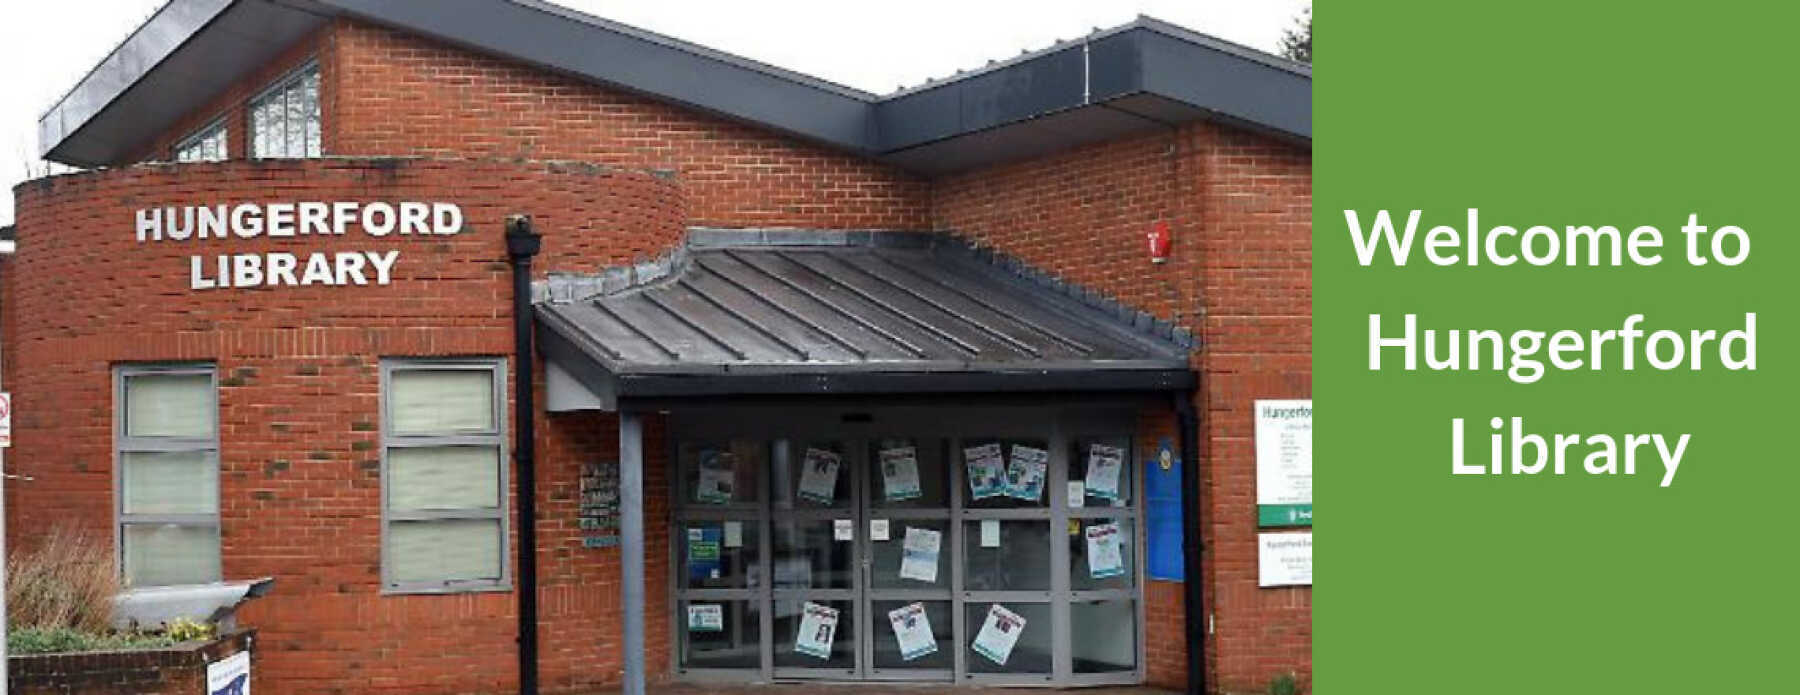 Featured Image for West Berkshire Libraries - Hungerford Library